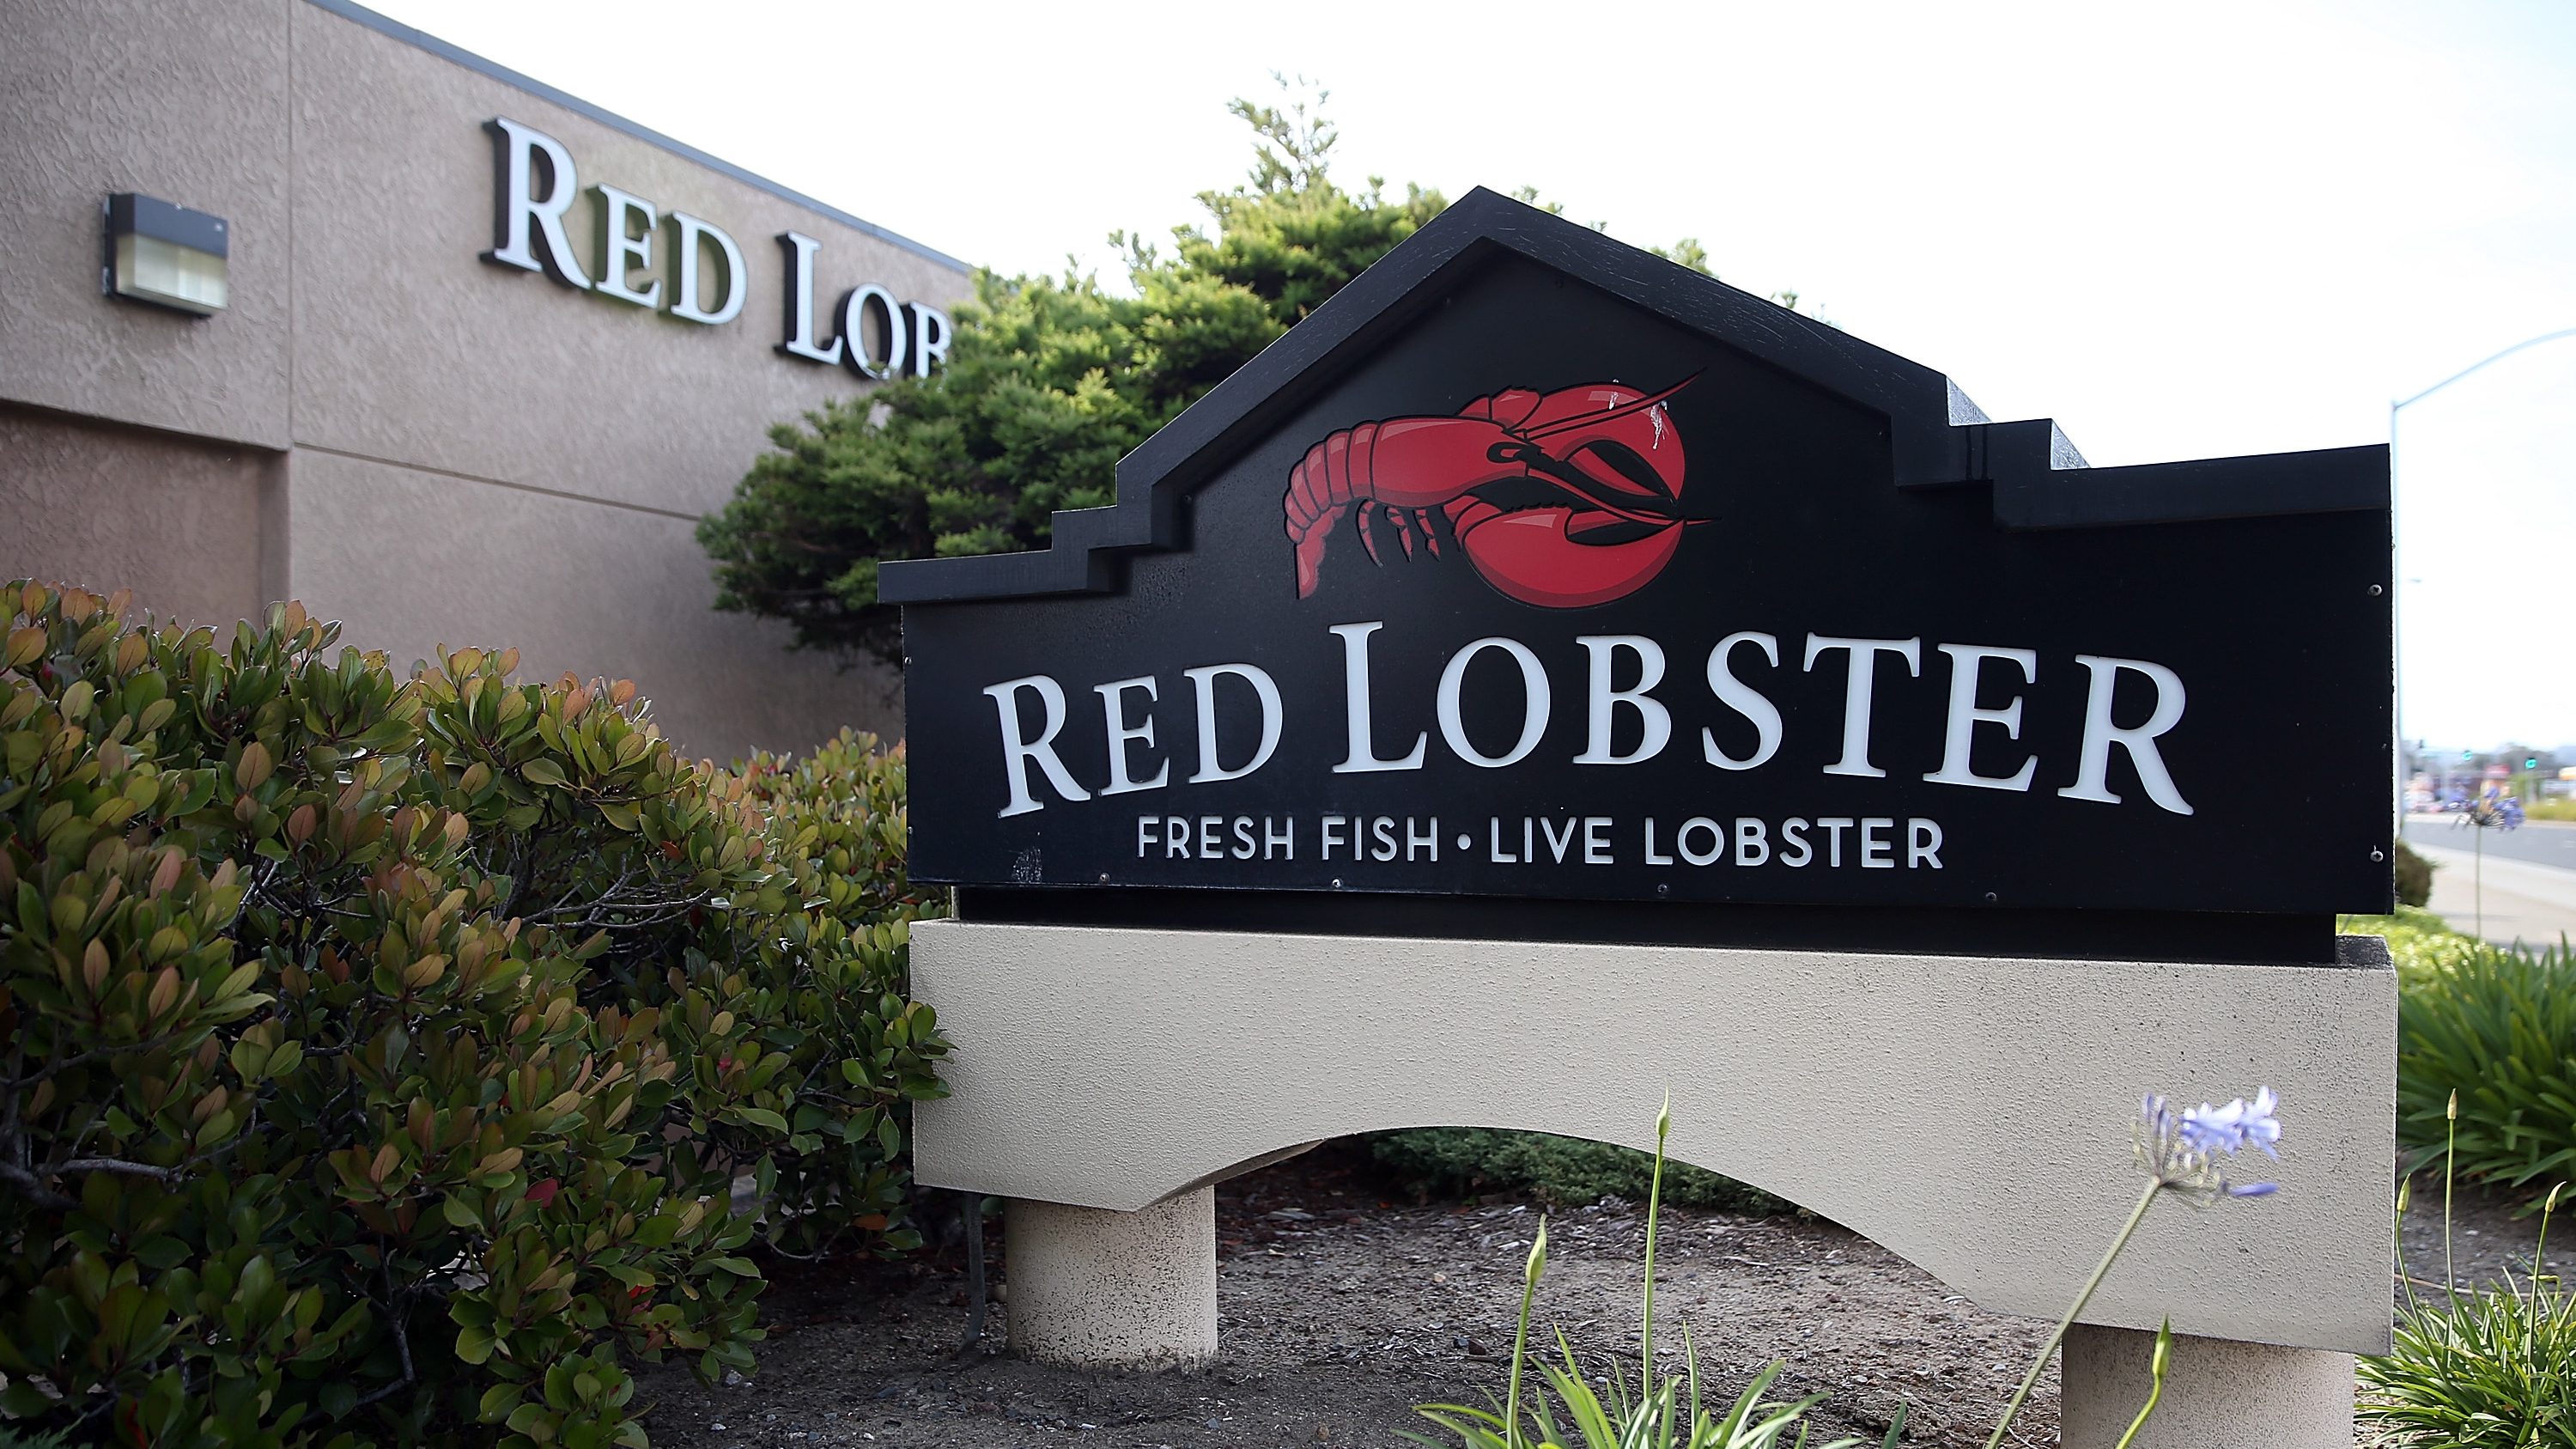 Red Lobster Is Hiring For A Variety Of Positions At 12 Northeast Ohio Locations [ 1687 x 3000 Pixel ]